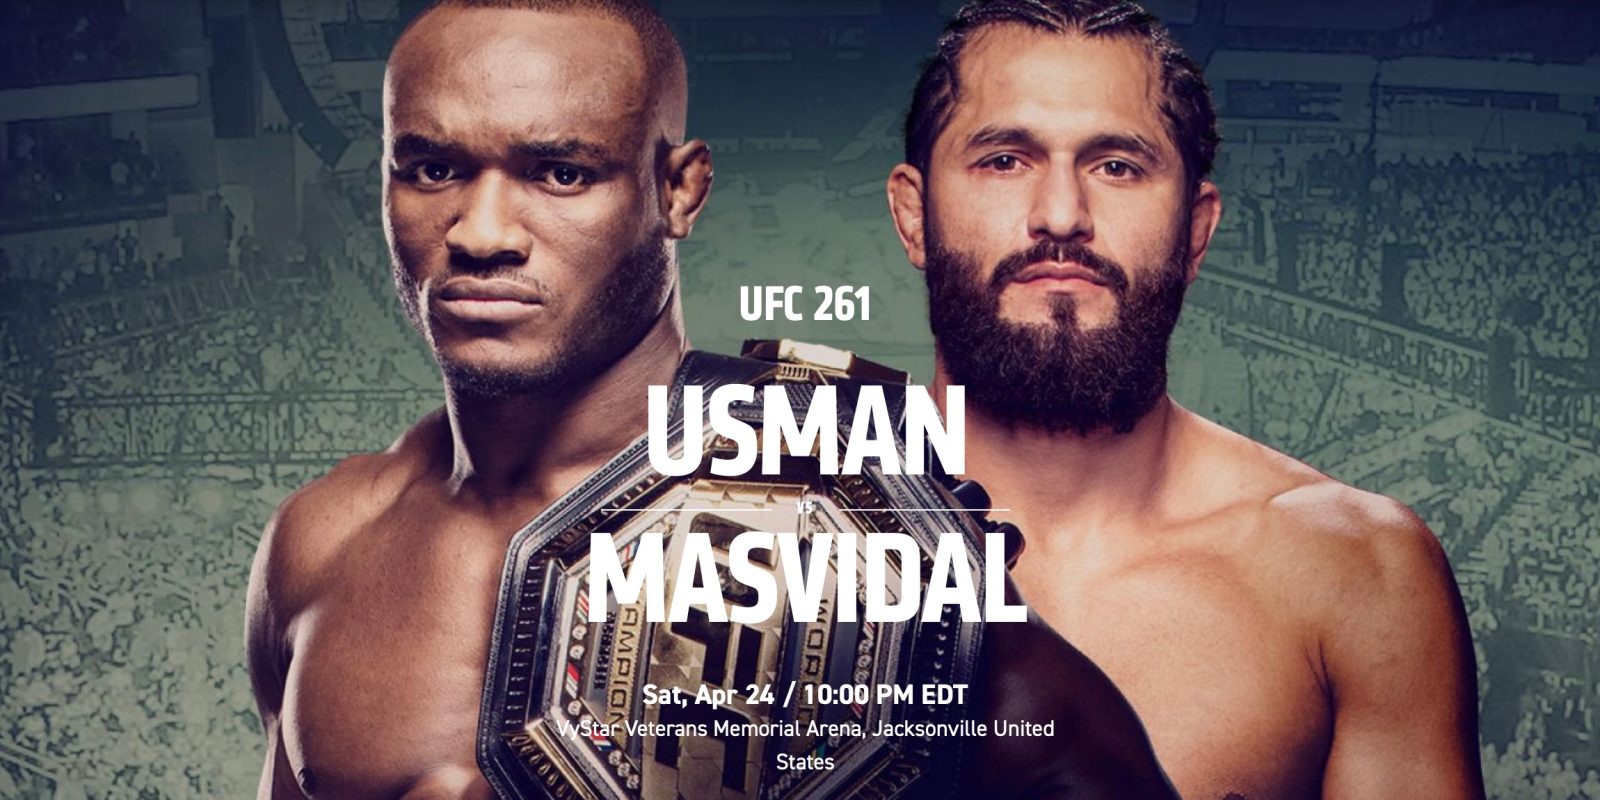 How to watch UFC 261 Usman vs Masvidal on iPhone, more ...